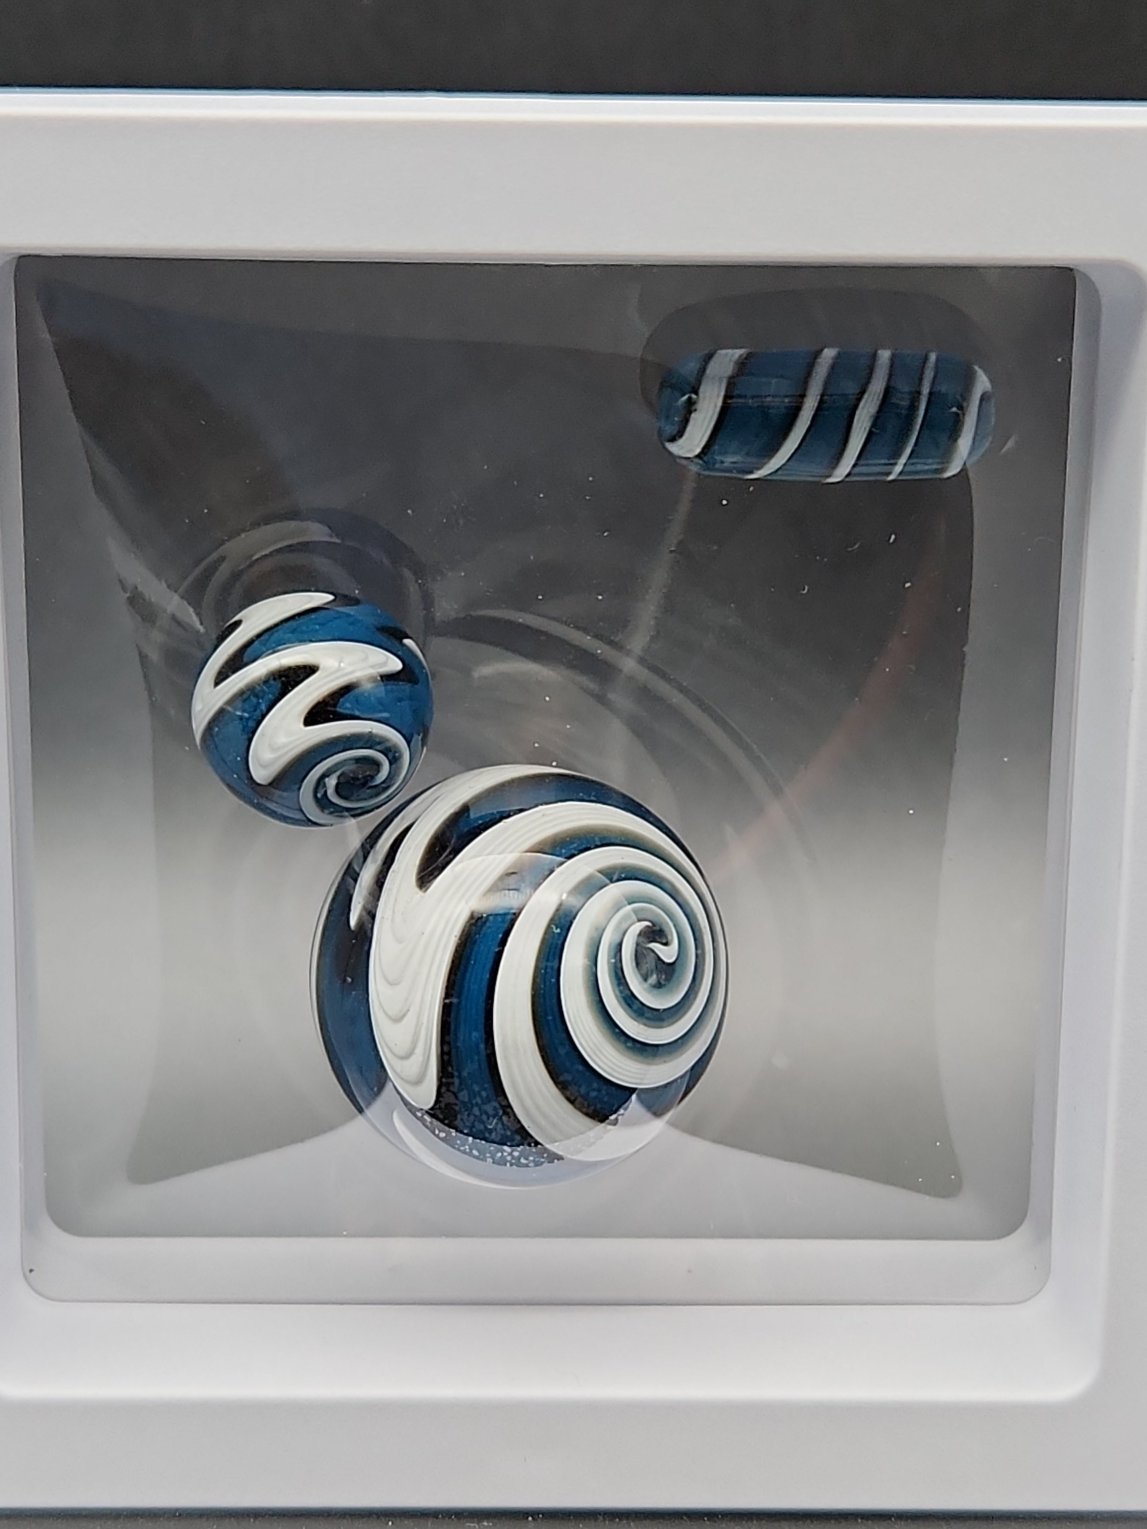 Wig Wag Terp Marble Kit 3 Piece Blue and White